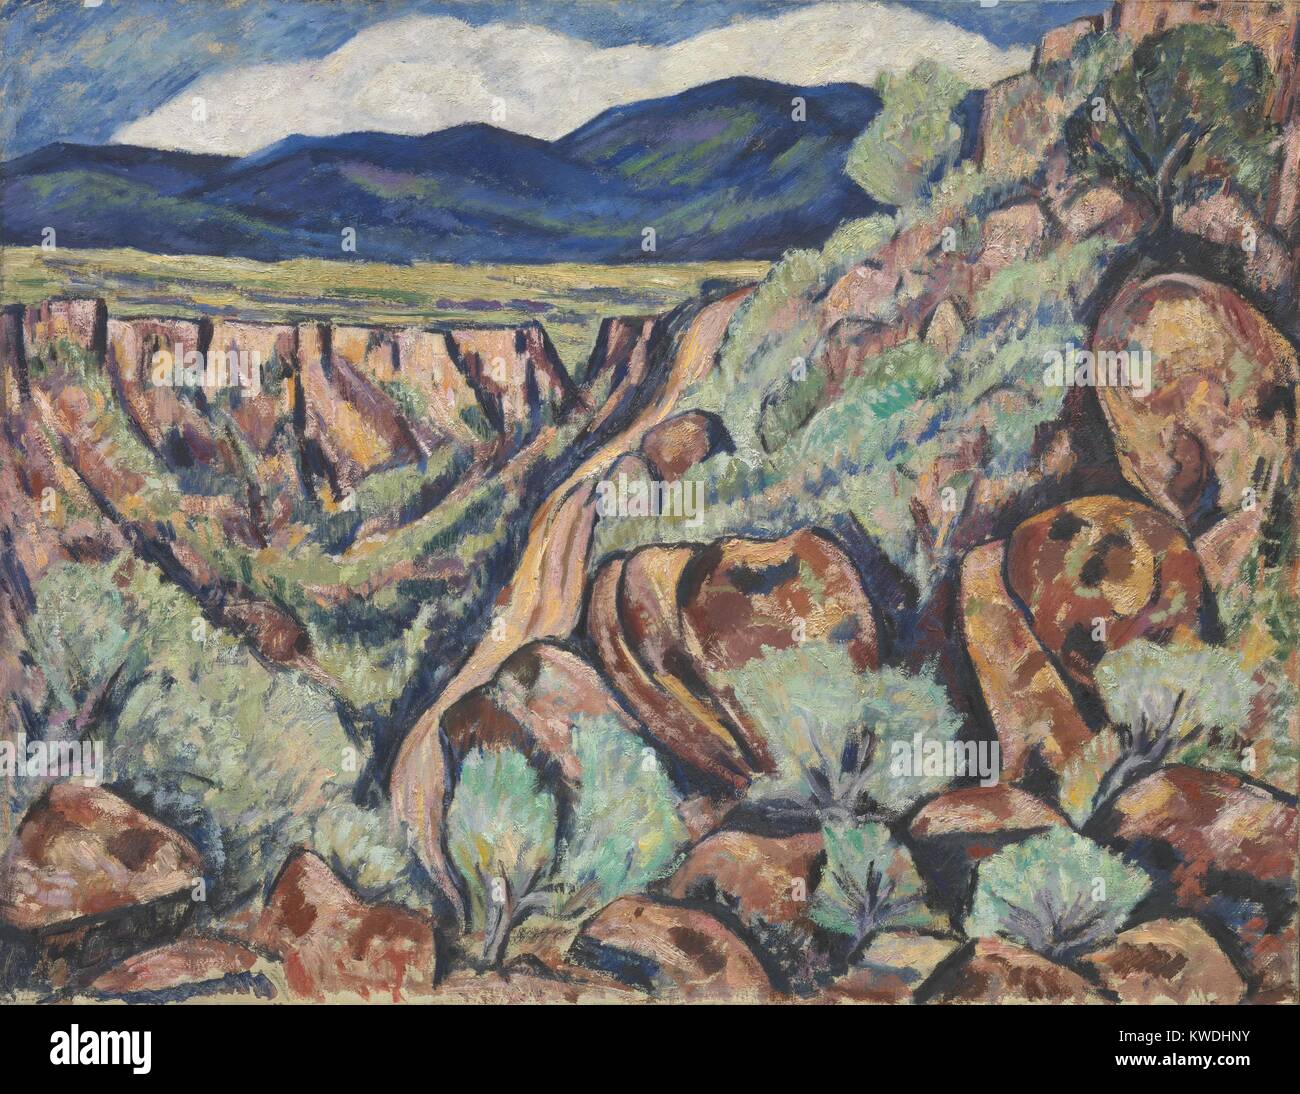 LANDSCAPE, NEW MEXICO, by Marsden Hartley, 1919-20, American painting, oil on canvas. This is executed in a Hartleys muscular synthesis of Cubism and German Expressionism (BSLOC 2017 7 107) Stock Photo